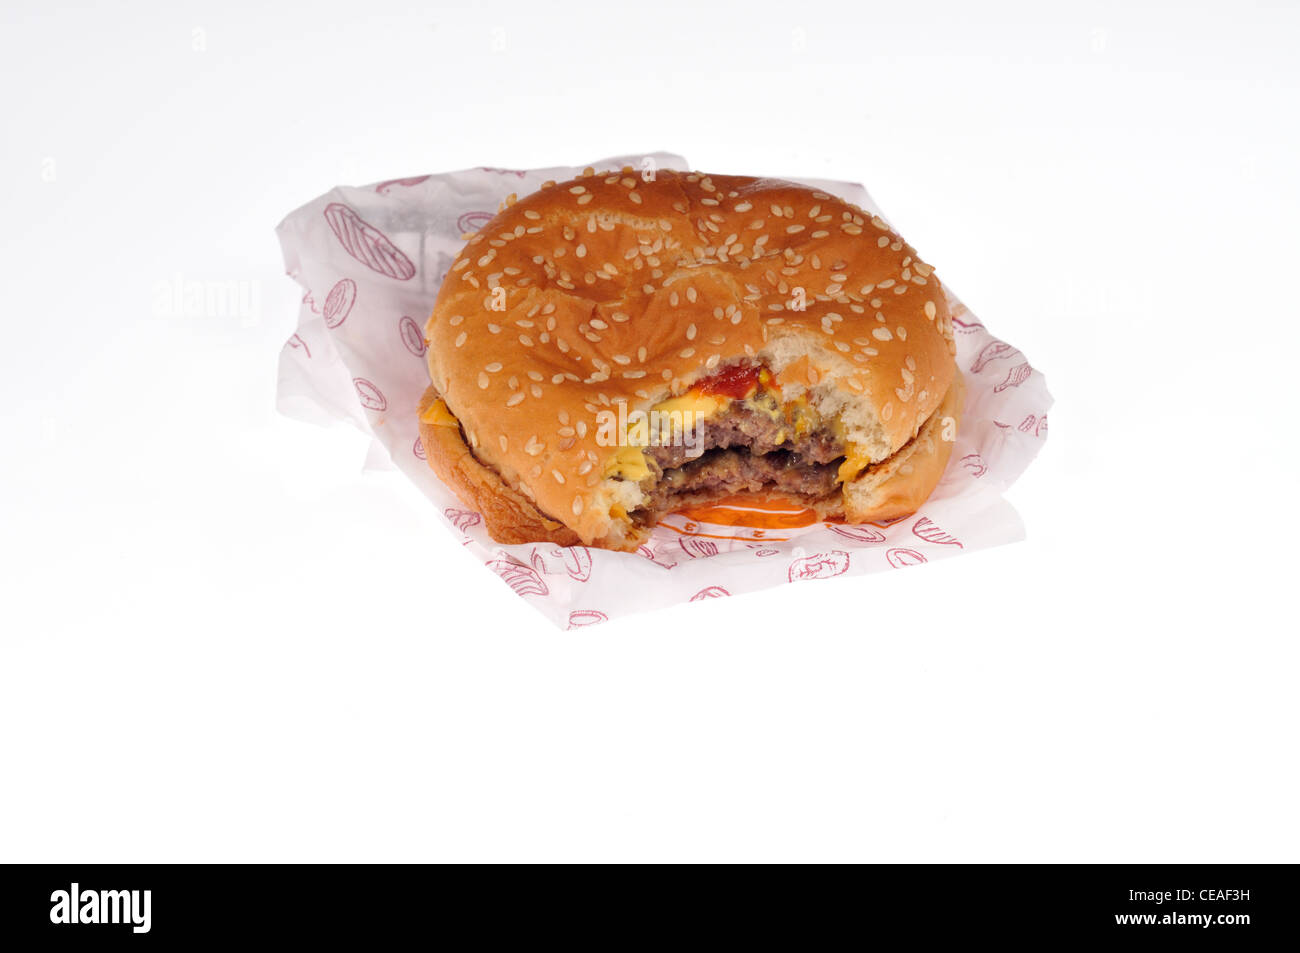 Burger King double cheeseburger with wrapper packaging on white background cutout. Stock Photo